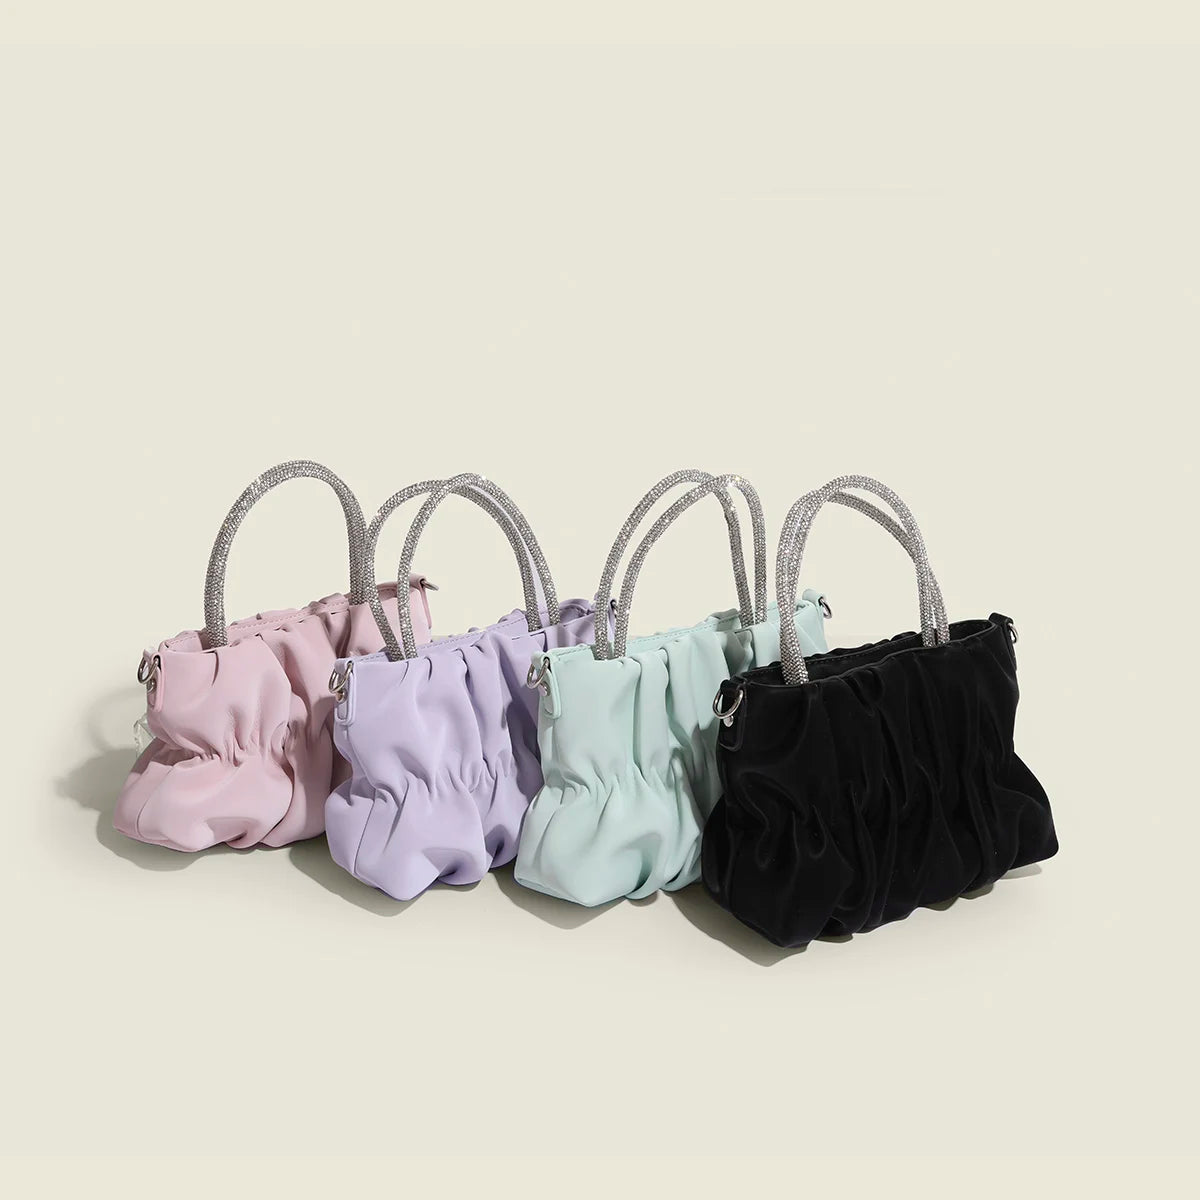 Chic Luxury Cloud Messenger Bag: Ruched Detail and Shoulder Comfort for Sophisticated Style